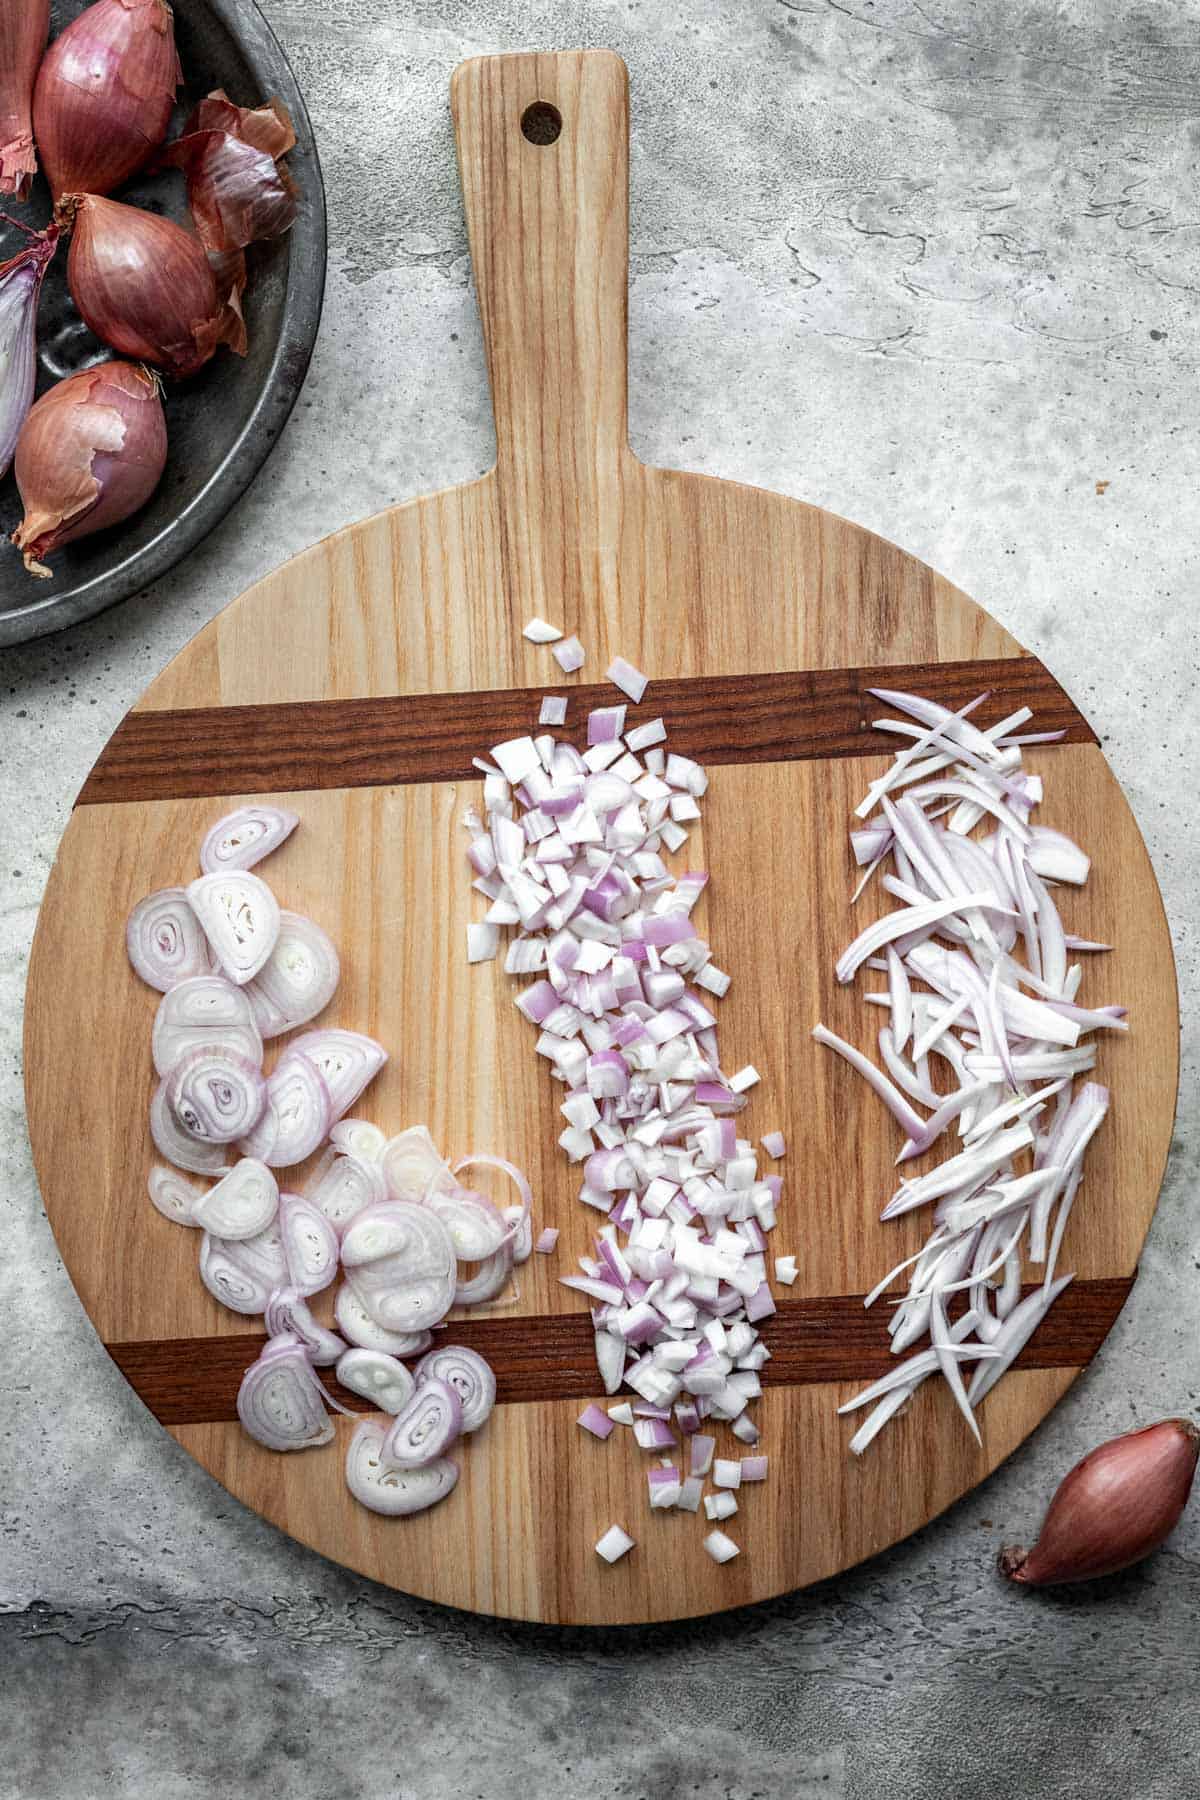 Shallots on a cutting board, cut 3 different ways.